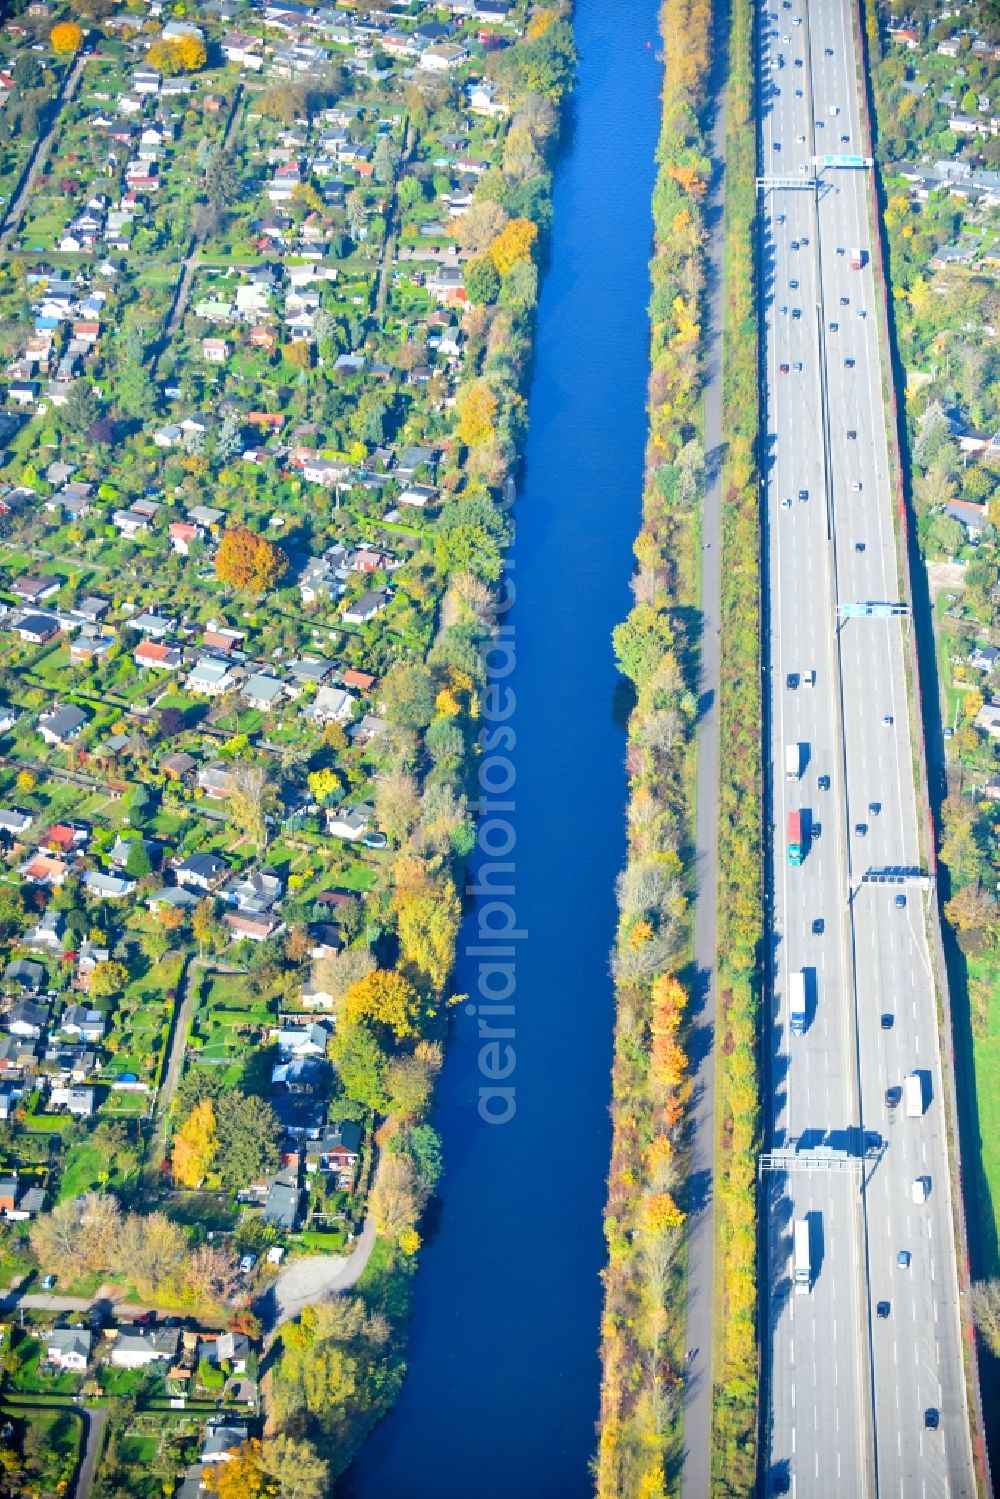 Berlin from the bird's eye view: Highway distance course of the highway A113 / E36 along the waters Teltowkanal on the border of the districts of Rudow, Johannisthal and Altglienicke in Berlin, Germany